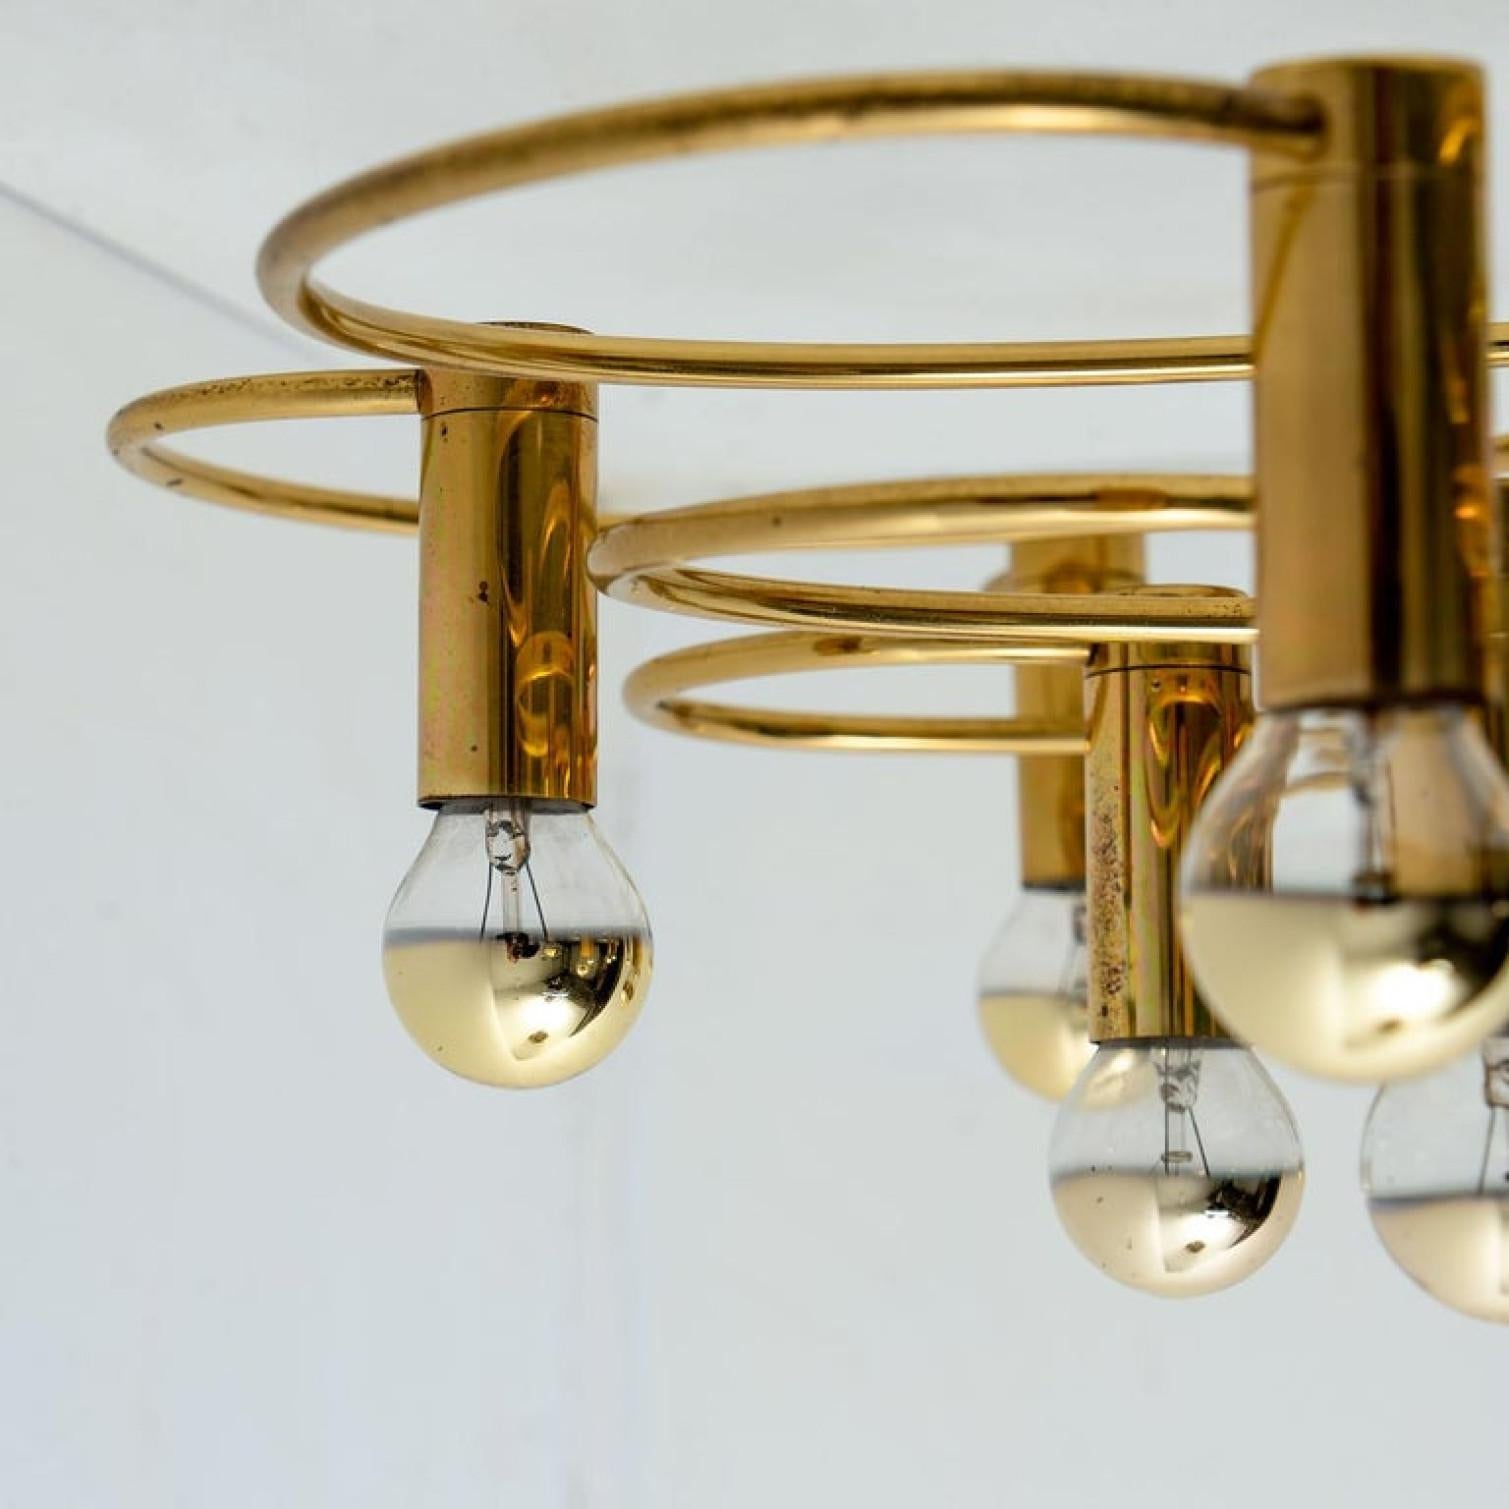 1 of the 2 Leola Sculptural Brass 13-Light Ceiling or Wall Flush Mount, 1970s For Sale 8